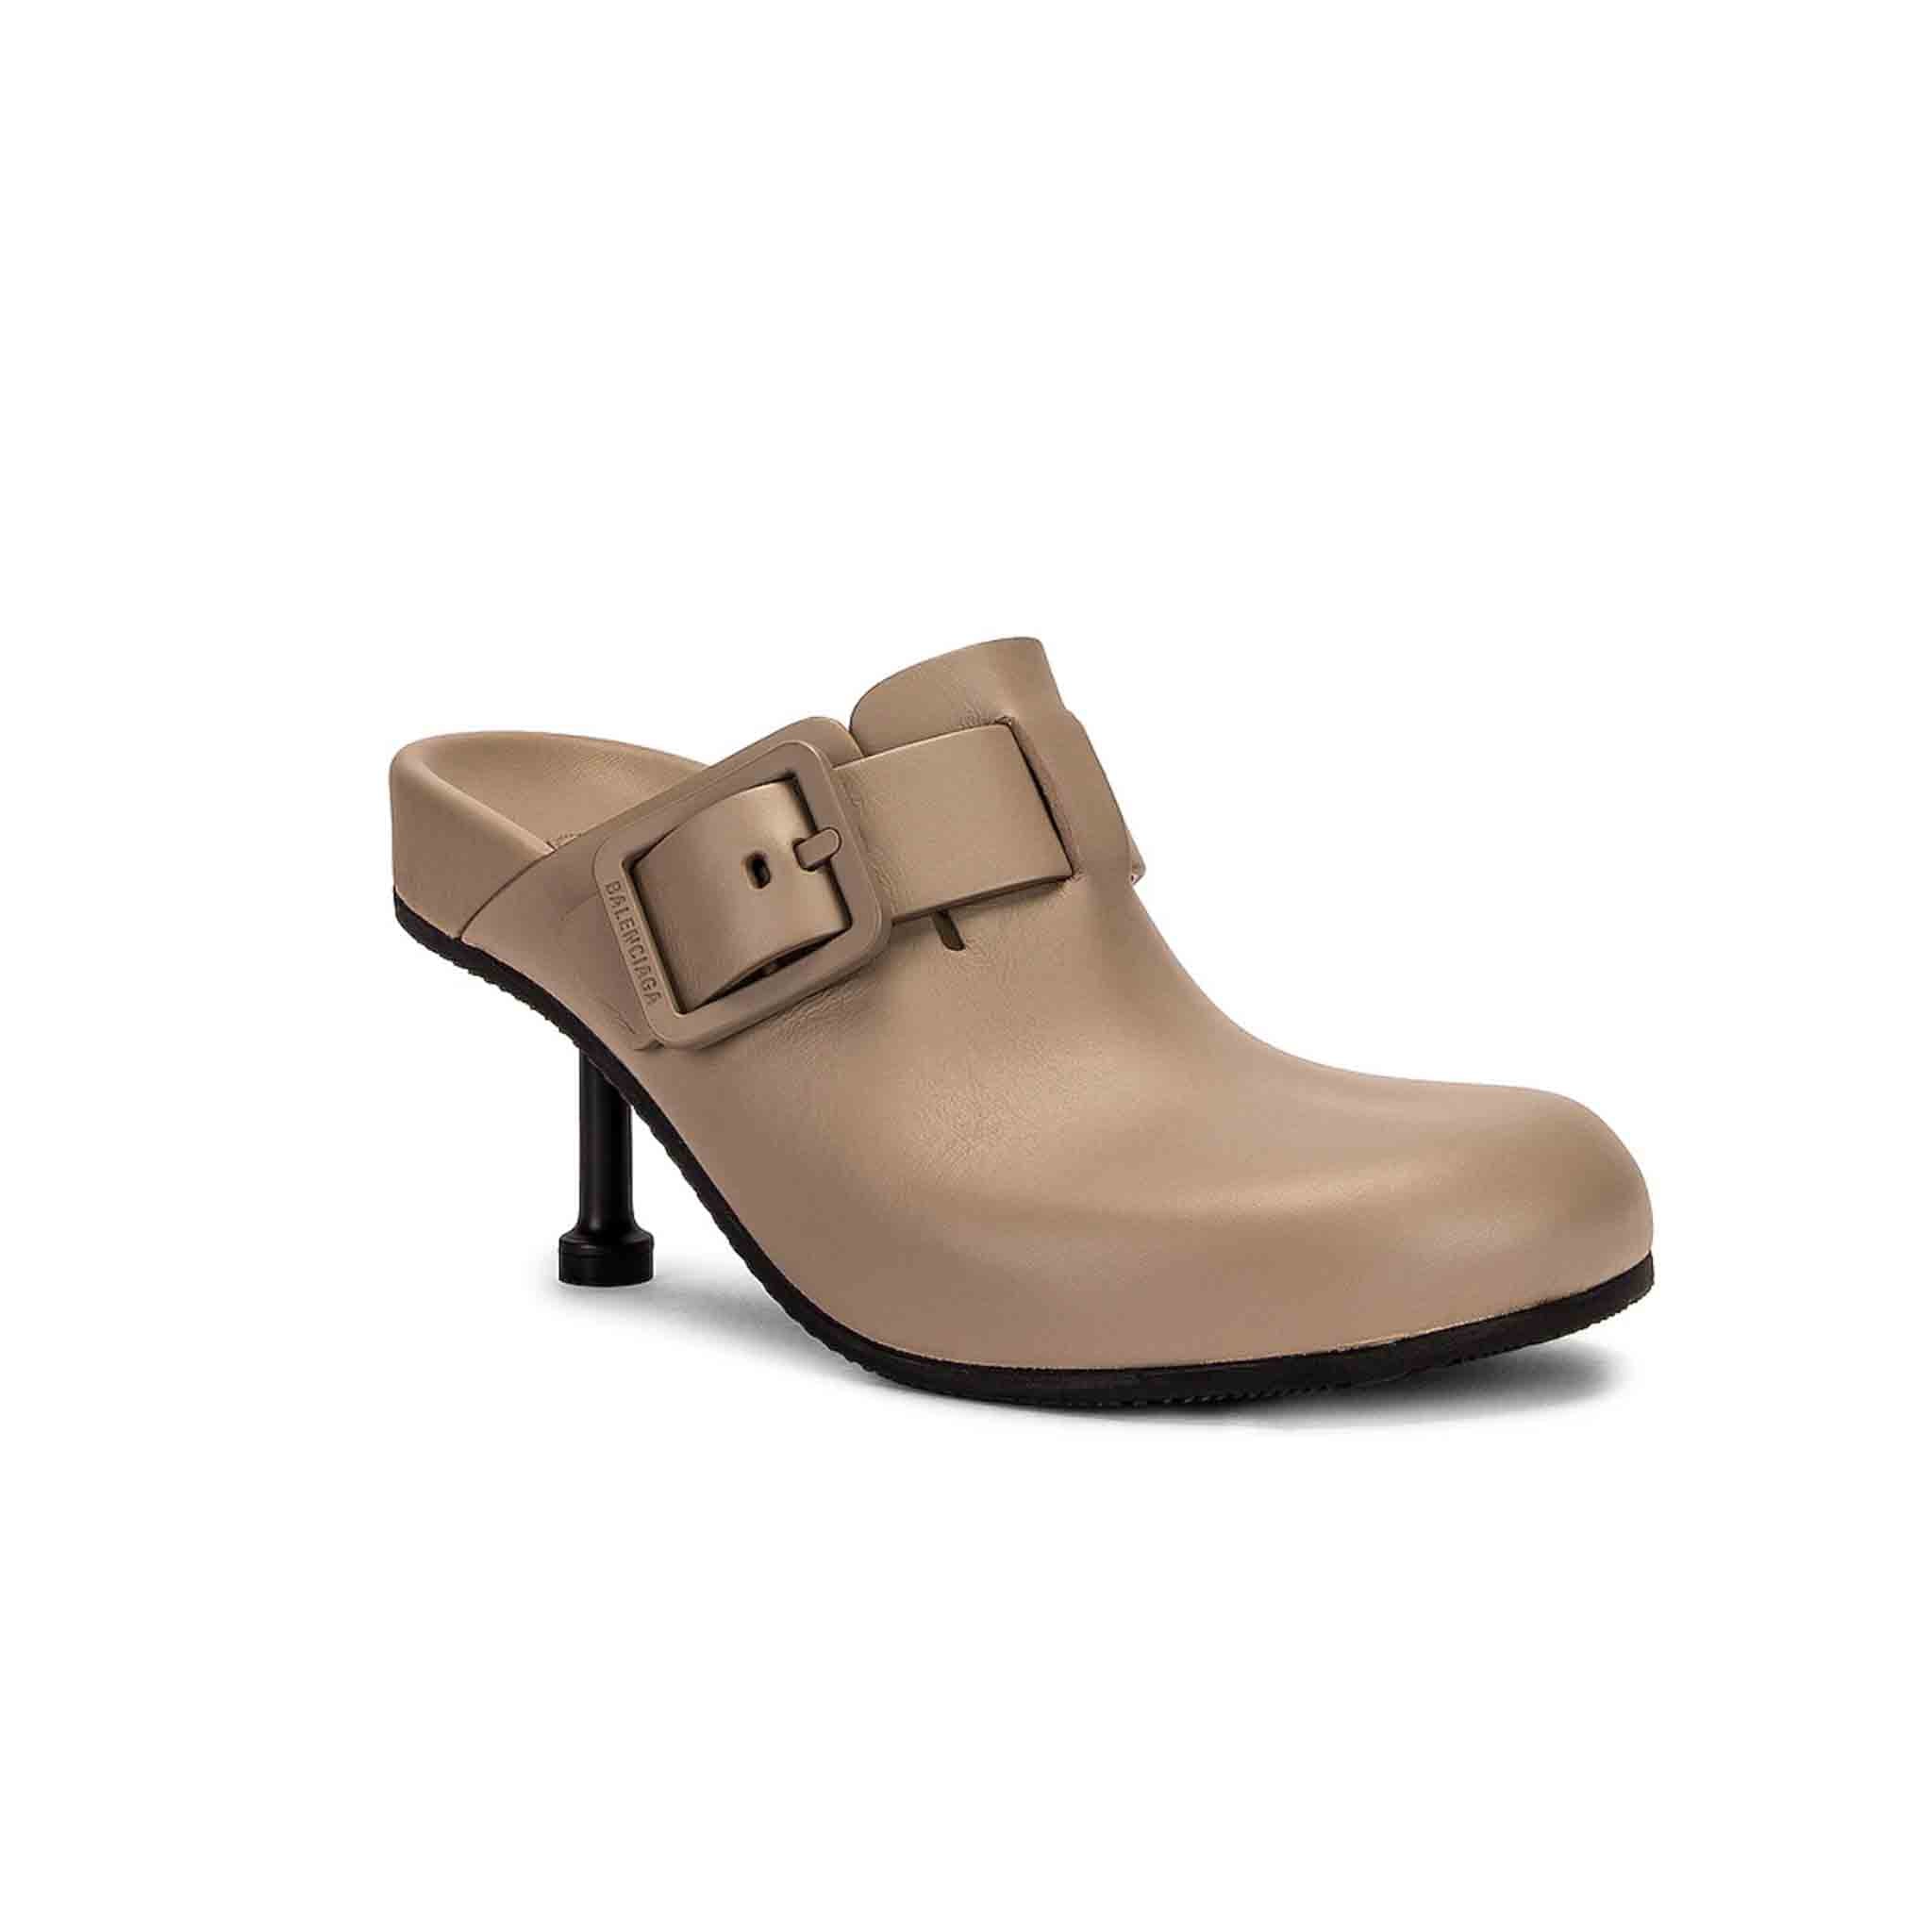 Elevate your shoe collection with these chic Mallorca mules from Balenciaga. The natural leather is stylish and wearable, while the tonal buckle embellishments add a touch of drama. The round toe and slip-on style make them easy to wear, and the 80mm stiletto heel gives you a little extra height. These mules are perfect for dressing up or dressing down.